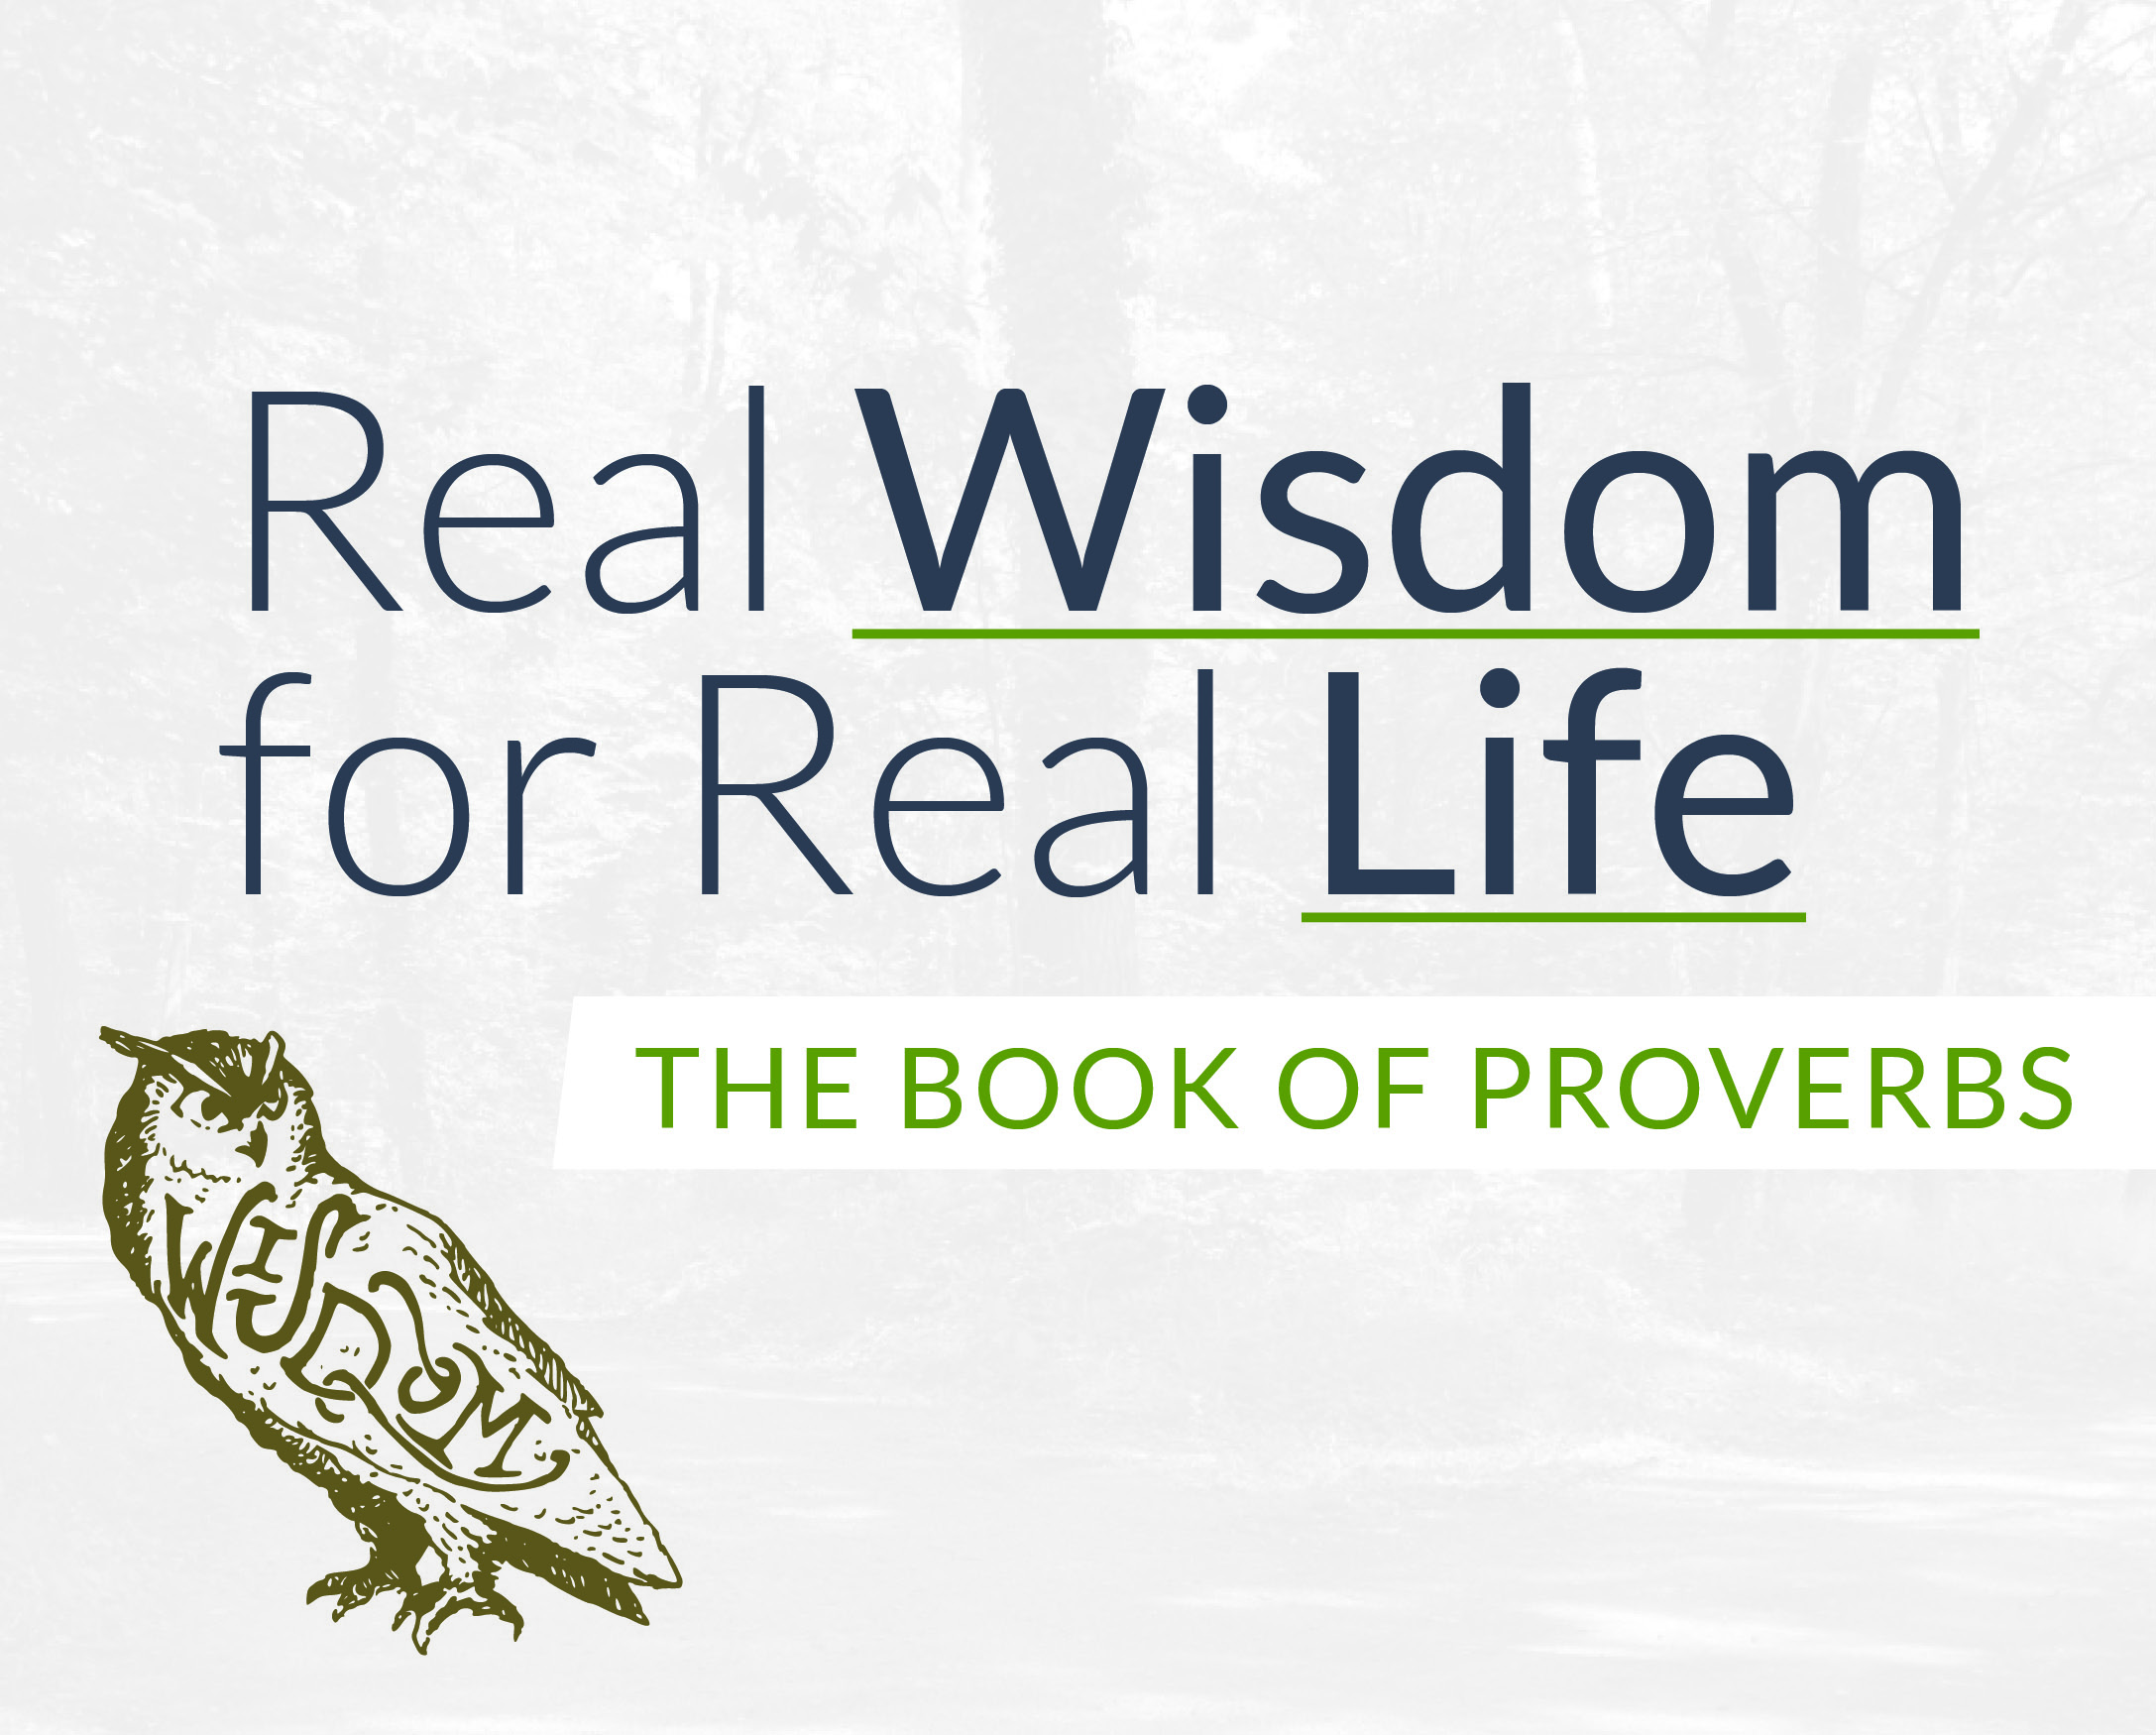 Real Wisdom for Real Life: Centered on the Lord